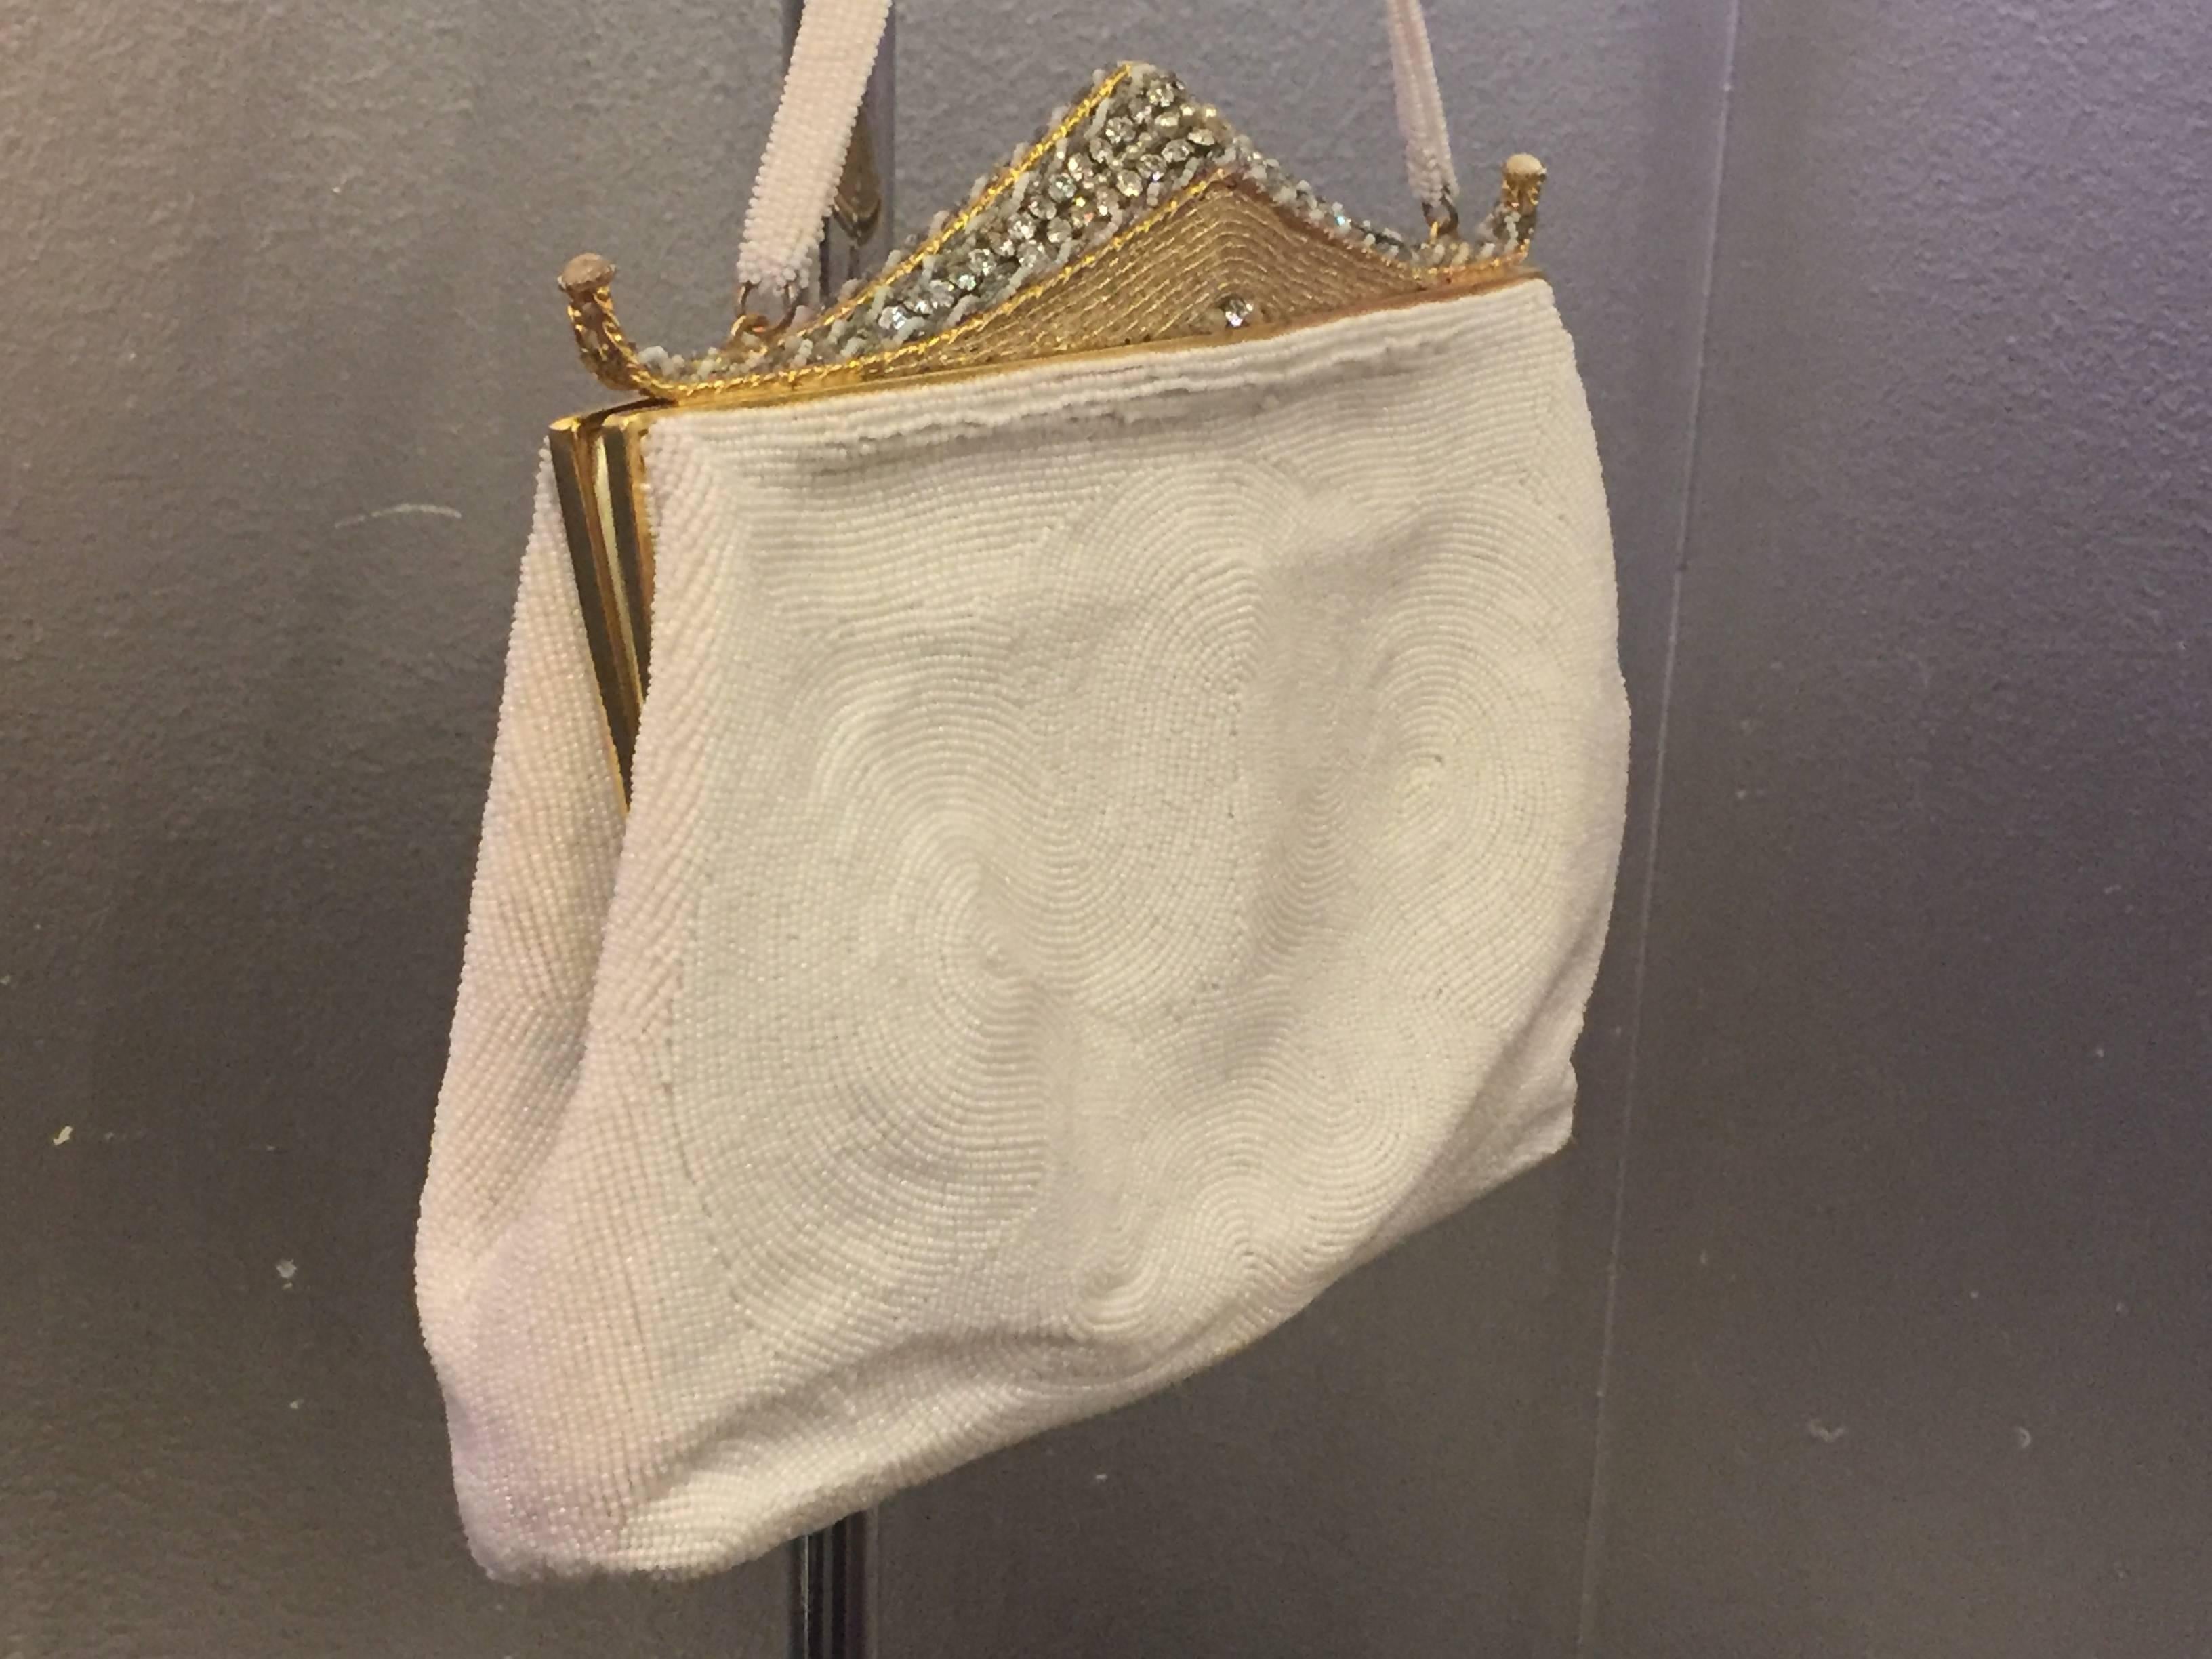 An unusual and whimsical white beaded purse with gold beaded and jeweled pagoda frame. A fan-shaped clasp opens to a white silk lining with pocket and coin purse. The white beading features a subtle scallop pattern. Most likely French. 

Length - 8